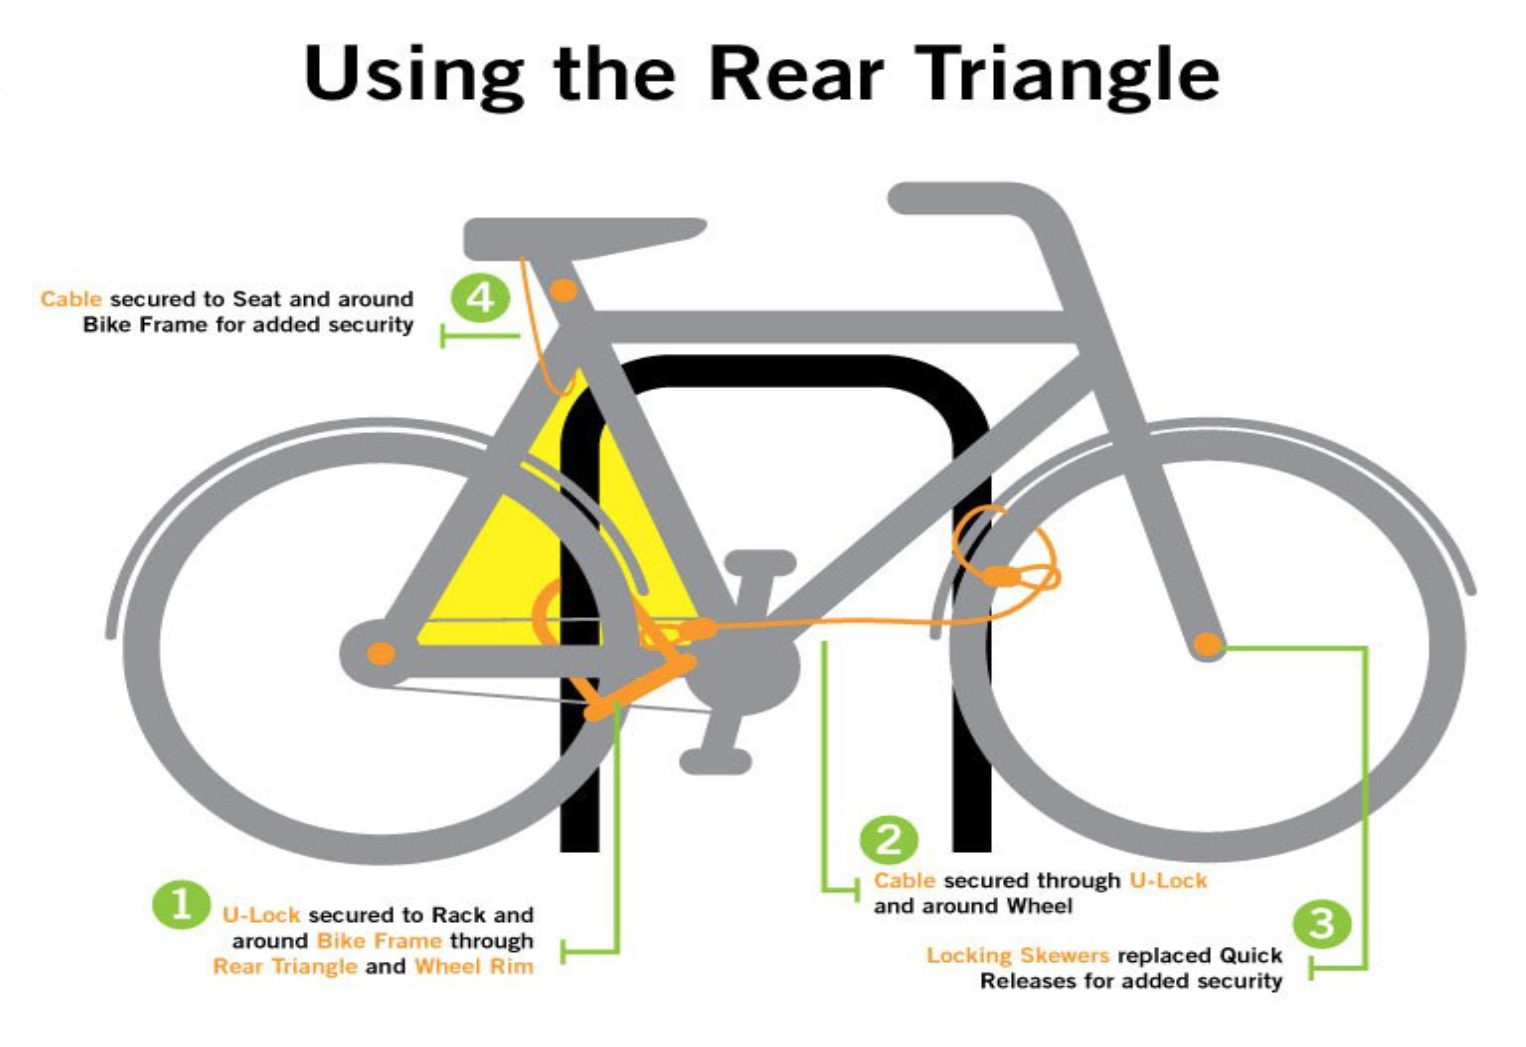 Picture illustrating the correct way to secure a bike